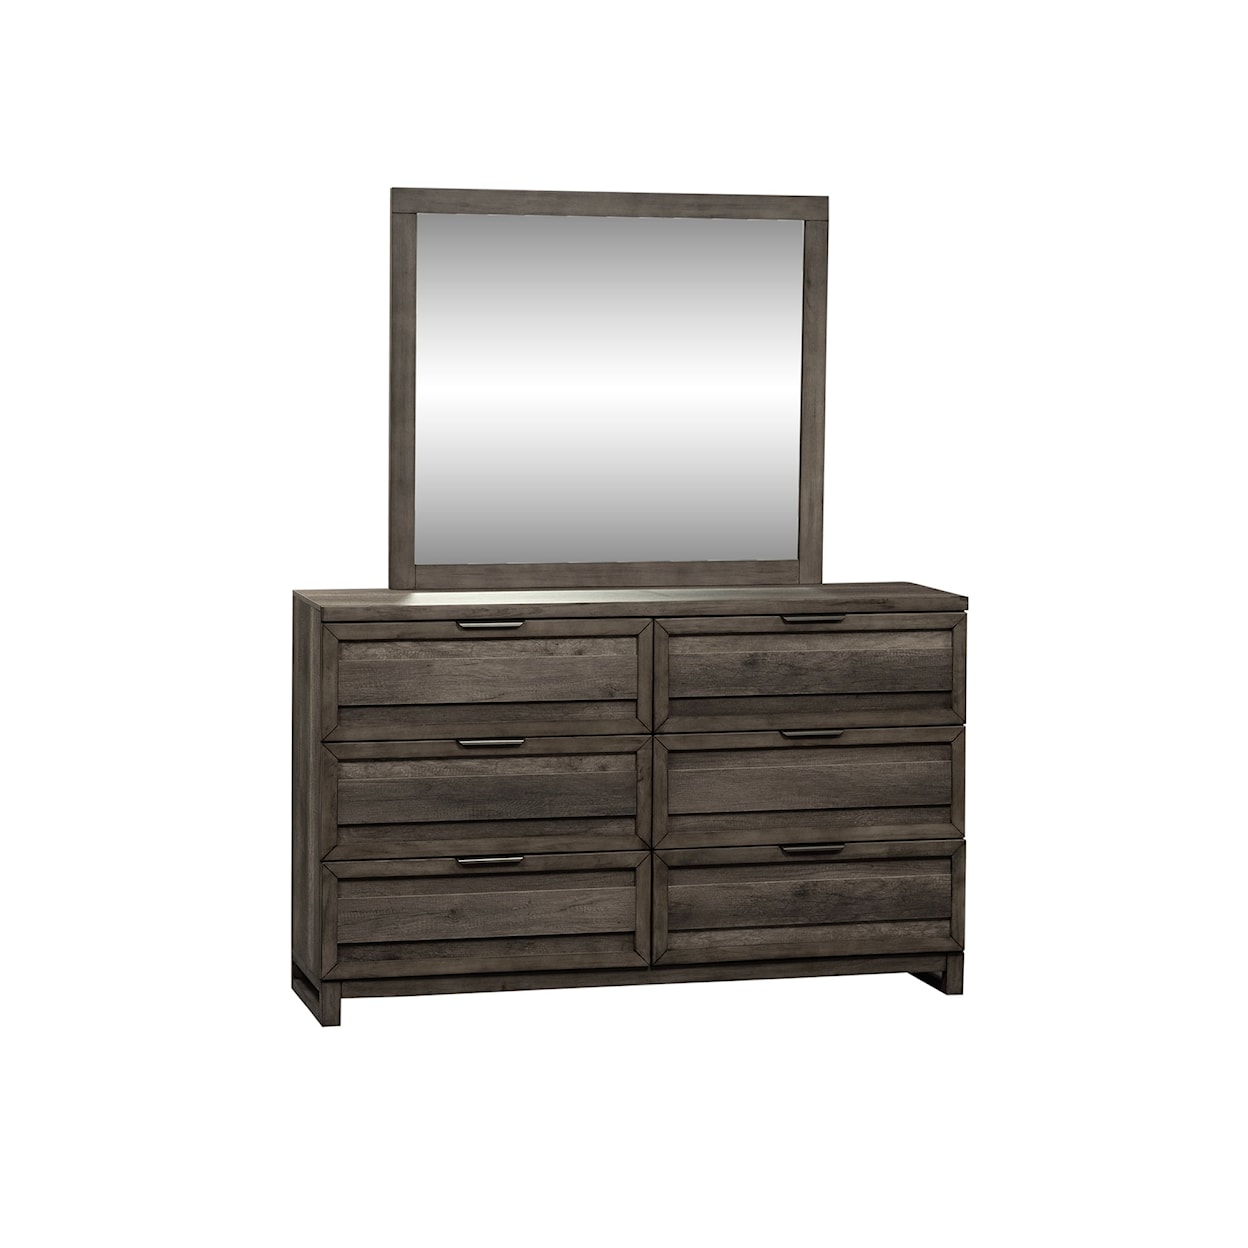 Liberty Furniture Tanners Creek Dresser and Mirror